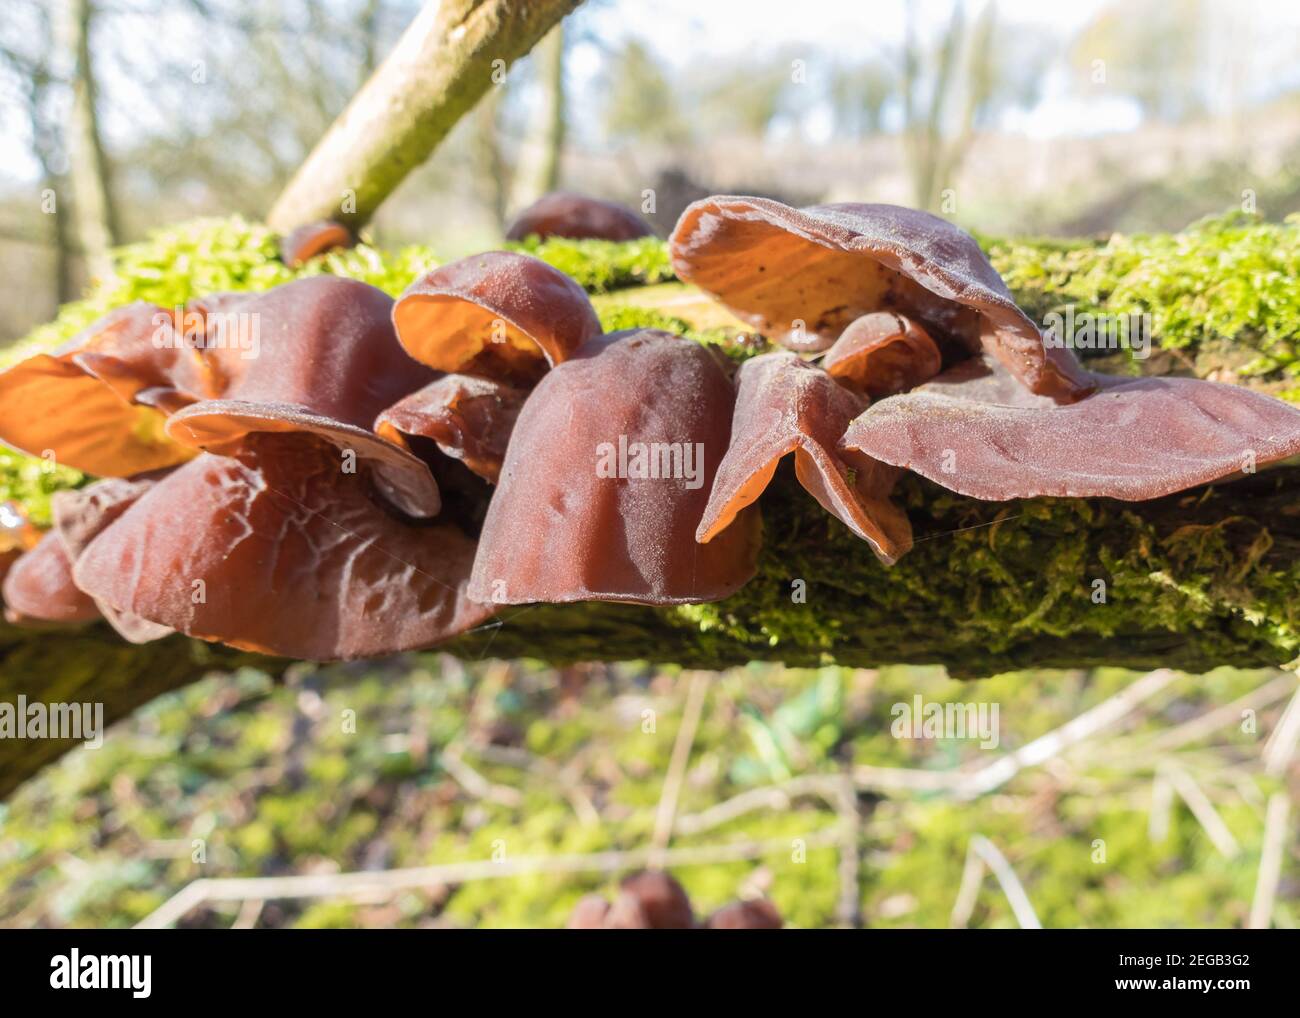 Jew,s Ear Fungi Auricularia auricula-judae (Auriculariaceae) also called Jelly ear, Wood ear, growing on moss covered decaying Elder branch. Herefords Stock Photo